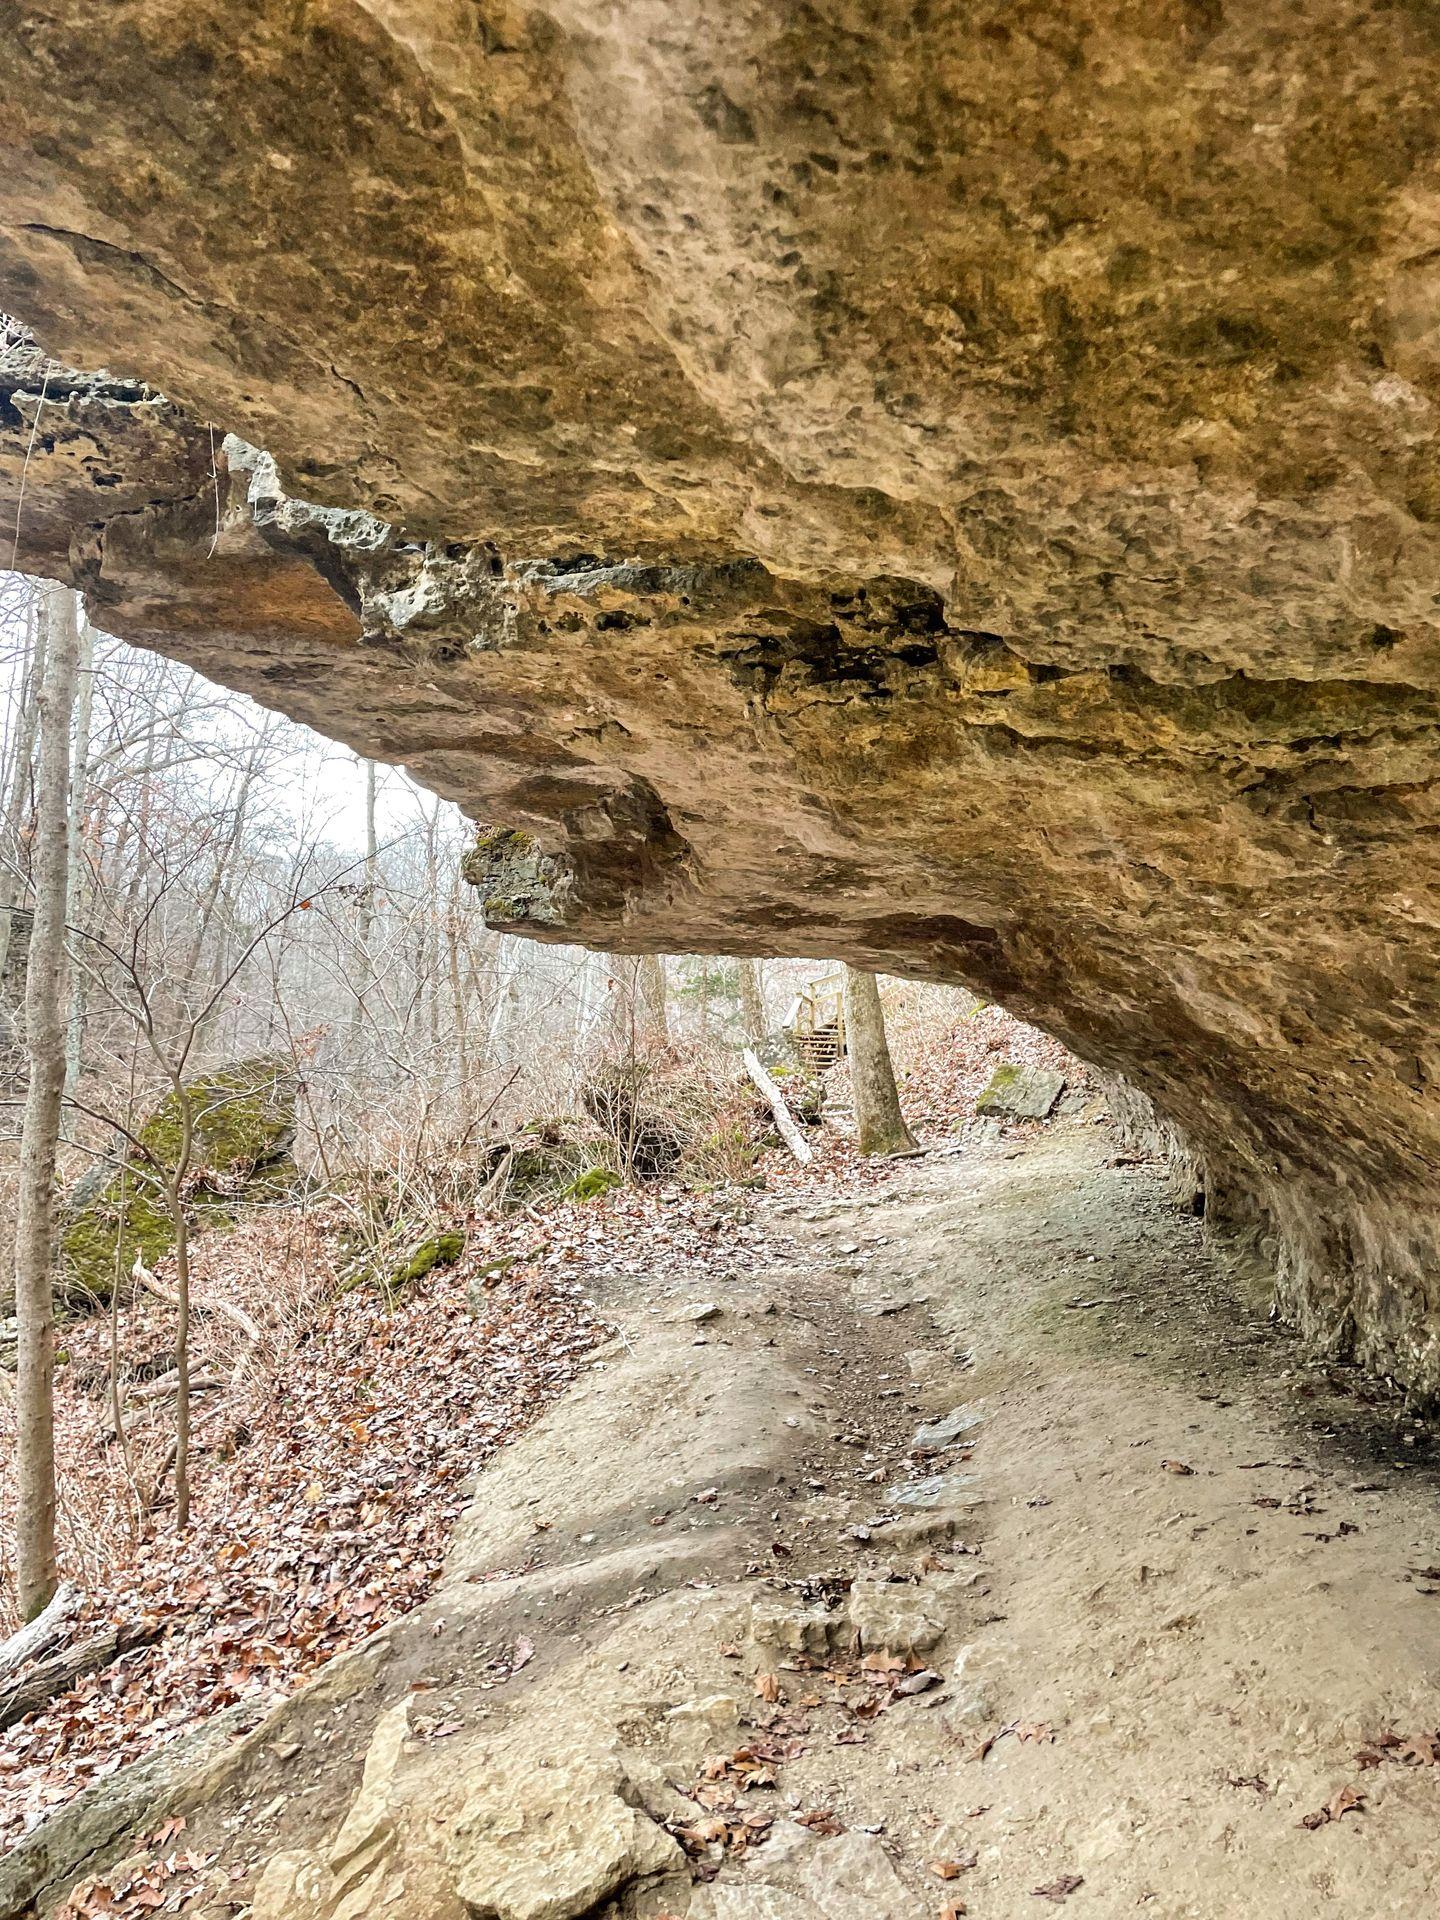 Hiking under a rocky overhang at Clifty Falls State Park